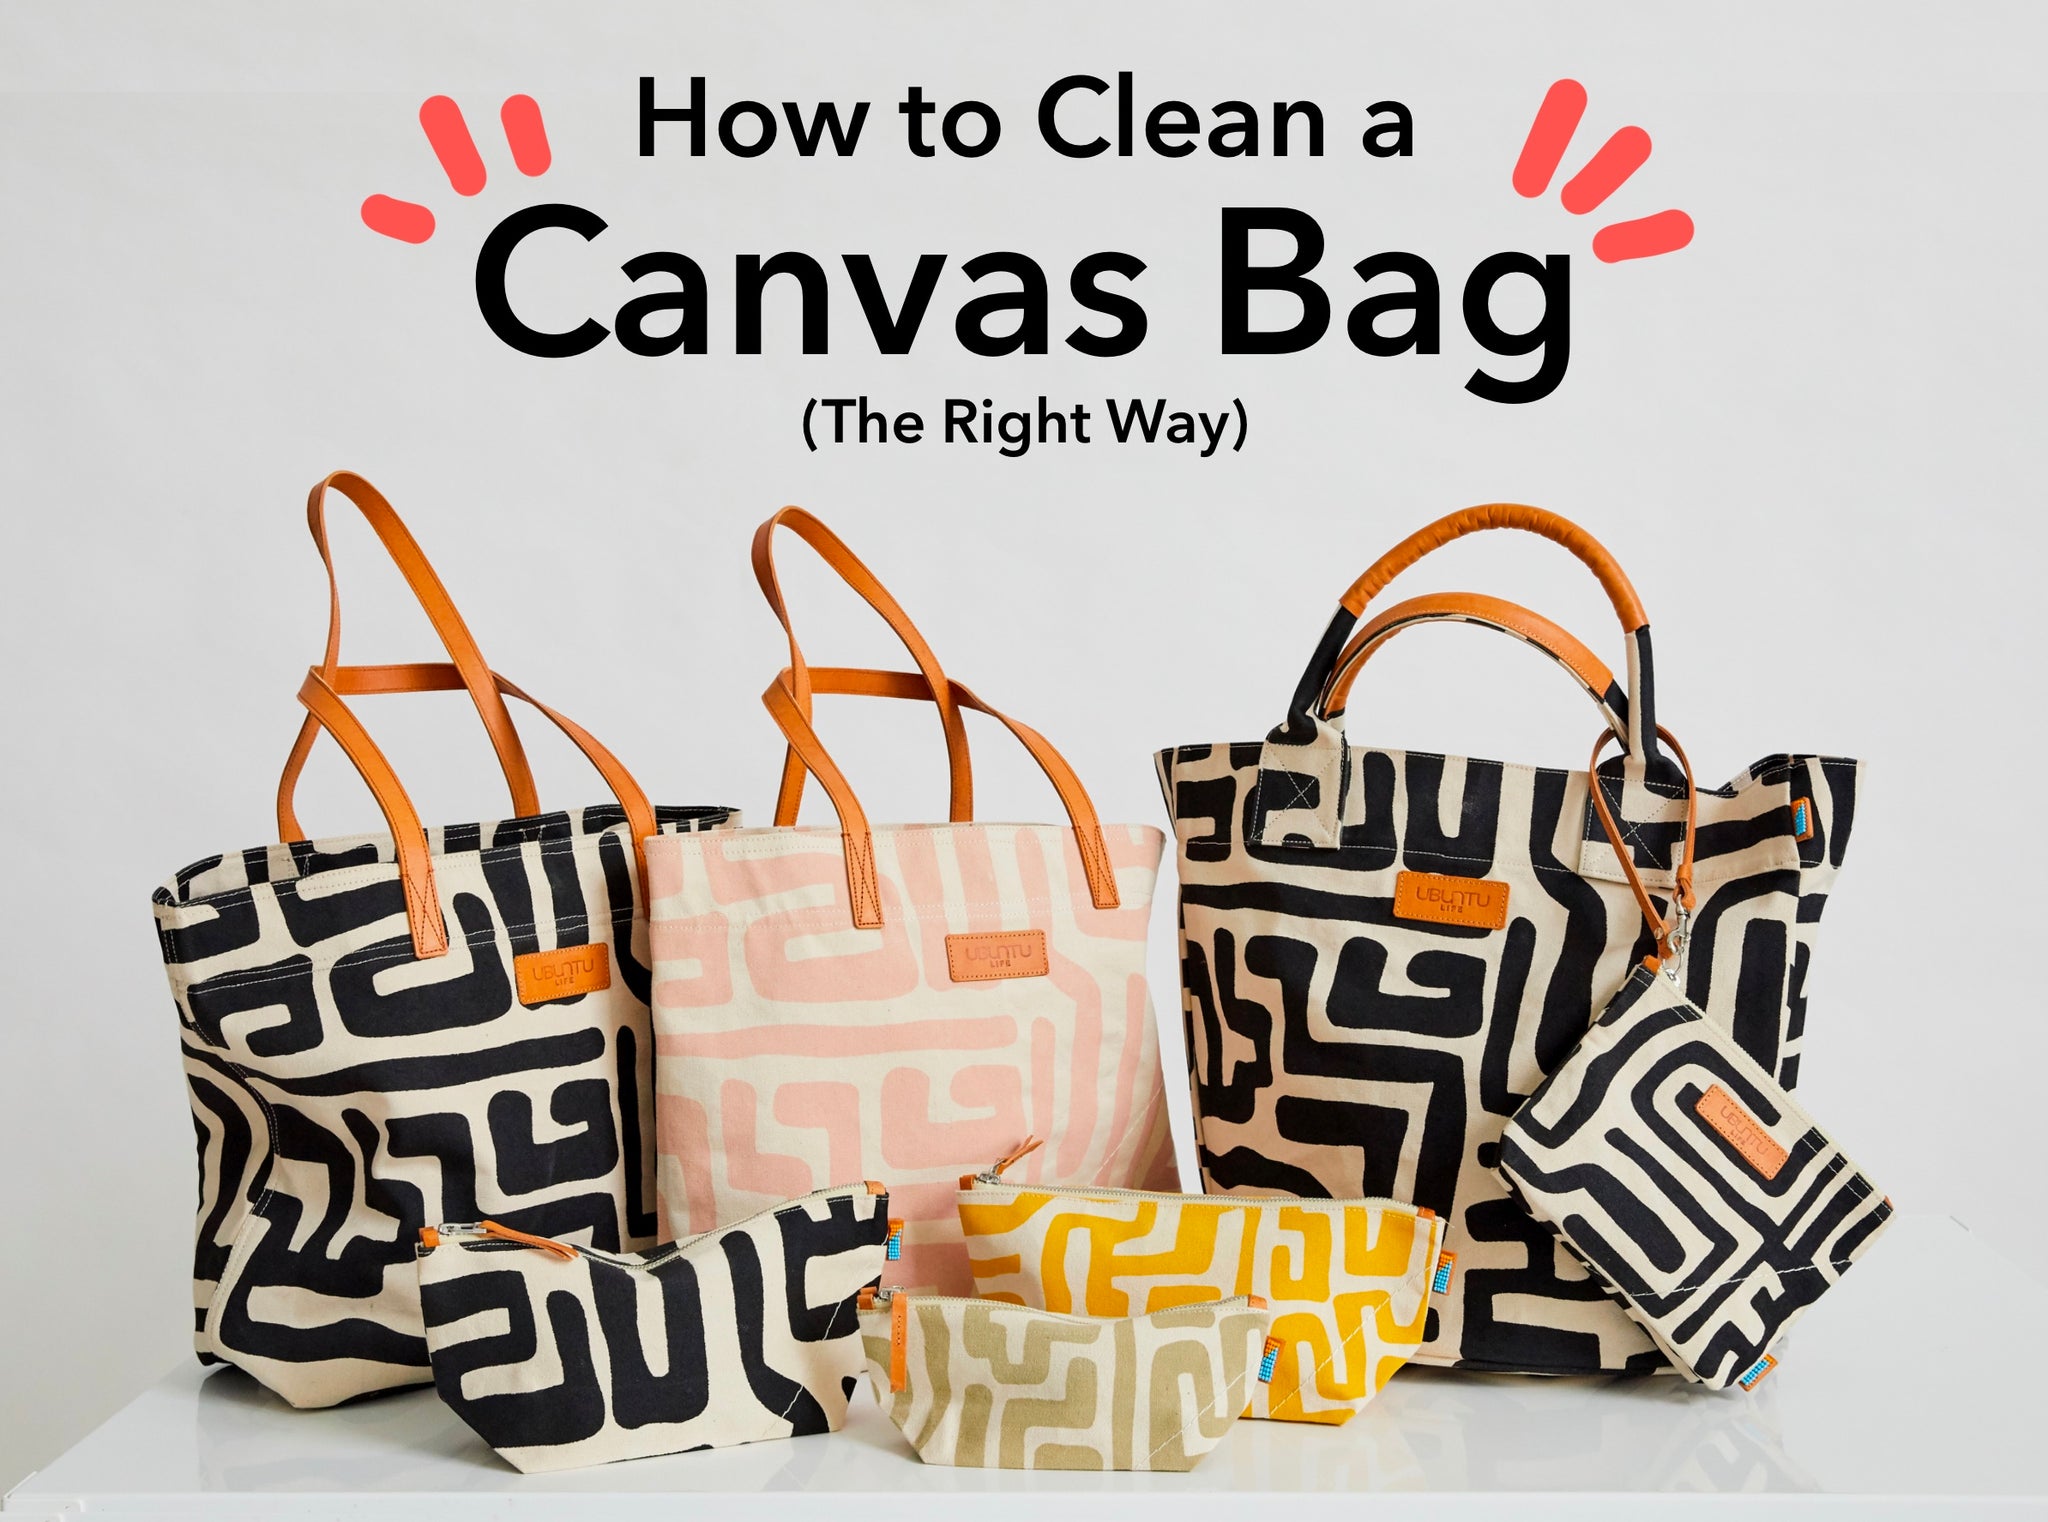 What is Coated Canvas and How Do I Look After It? - The Handbag Spa